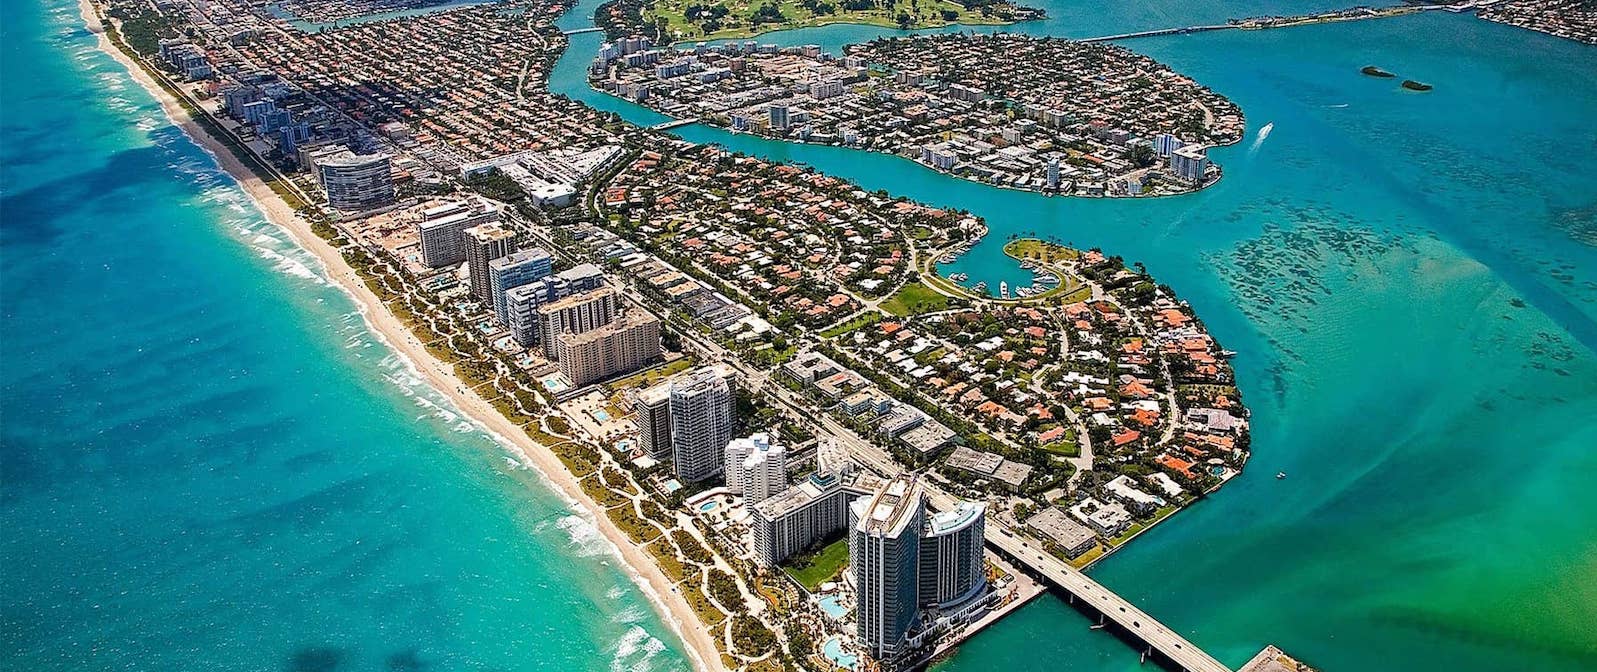 An aerial view of Bal Harbour